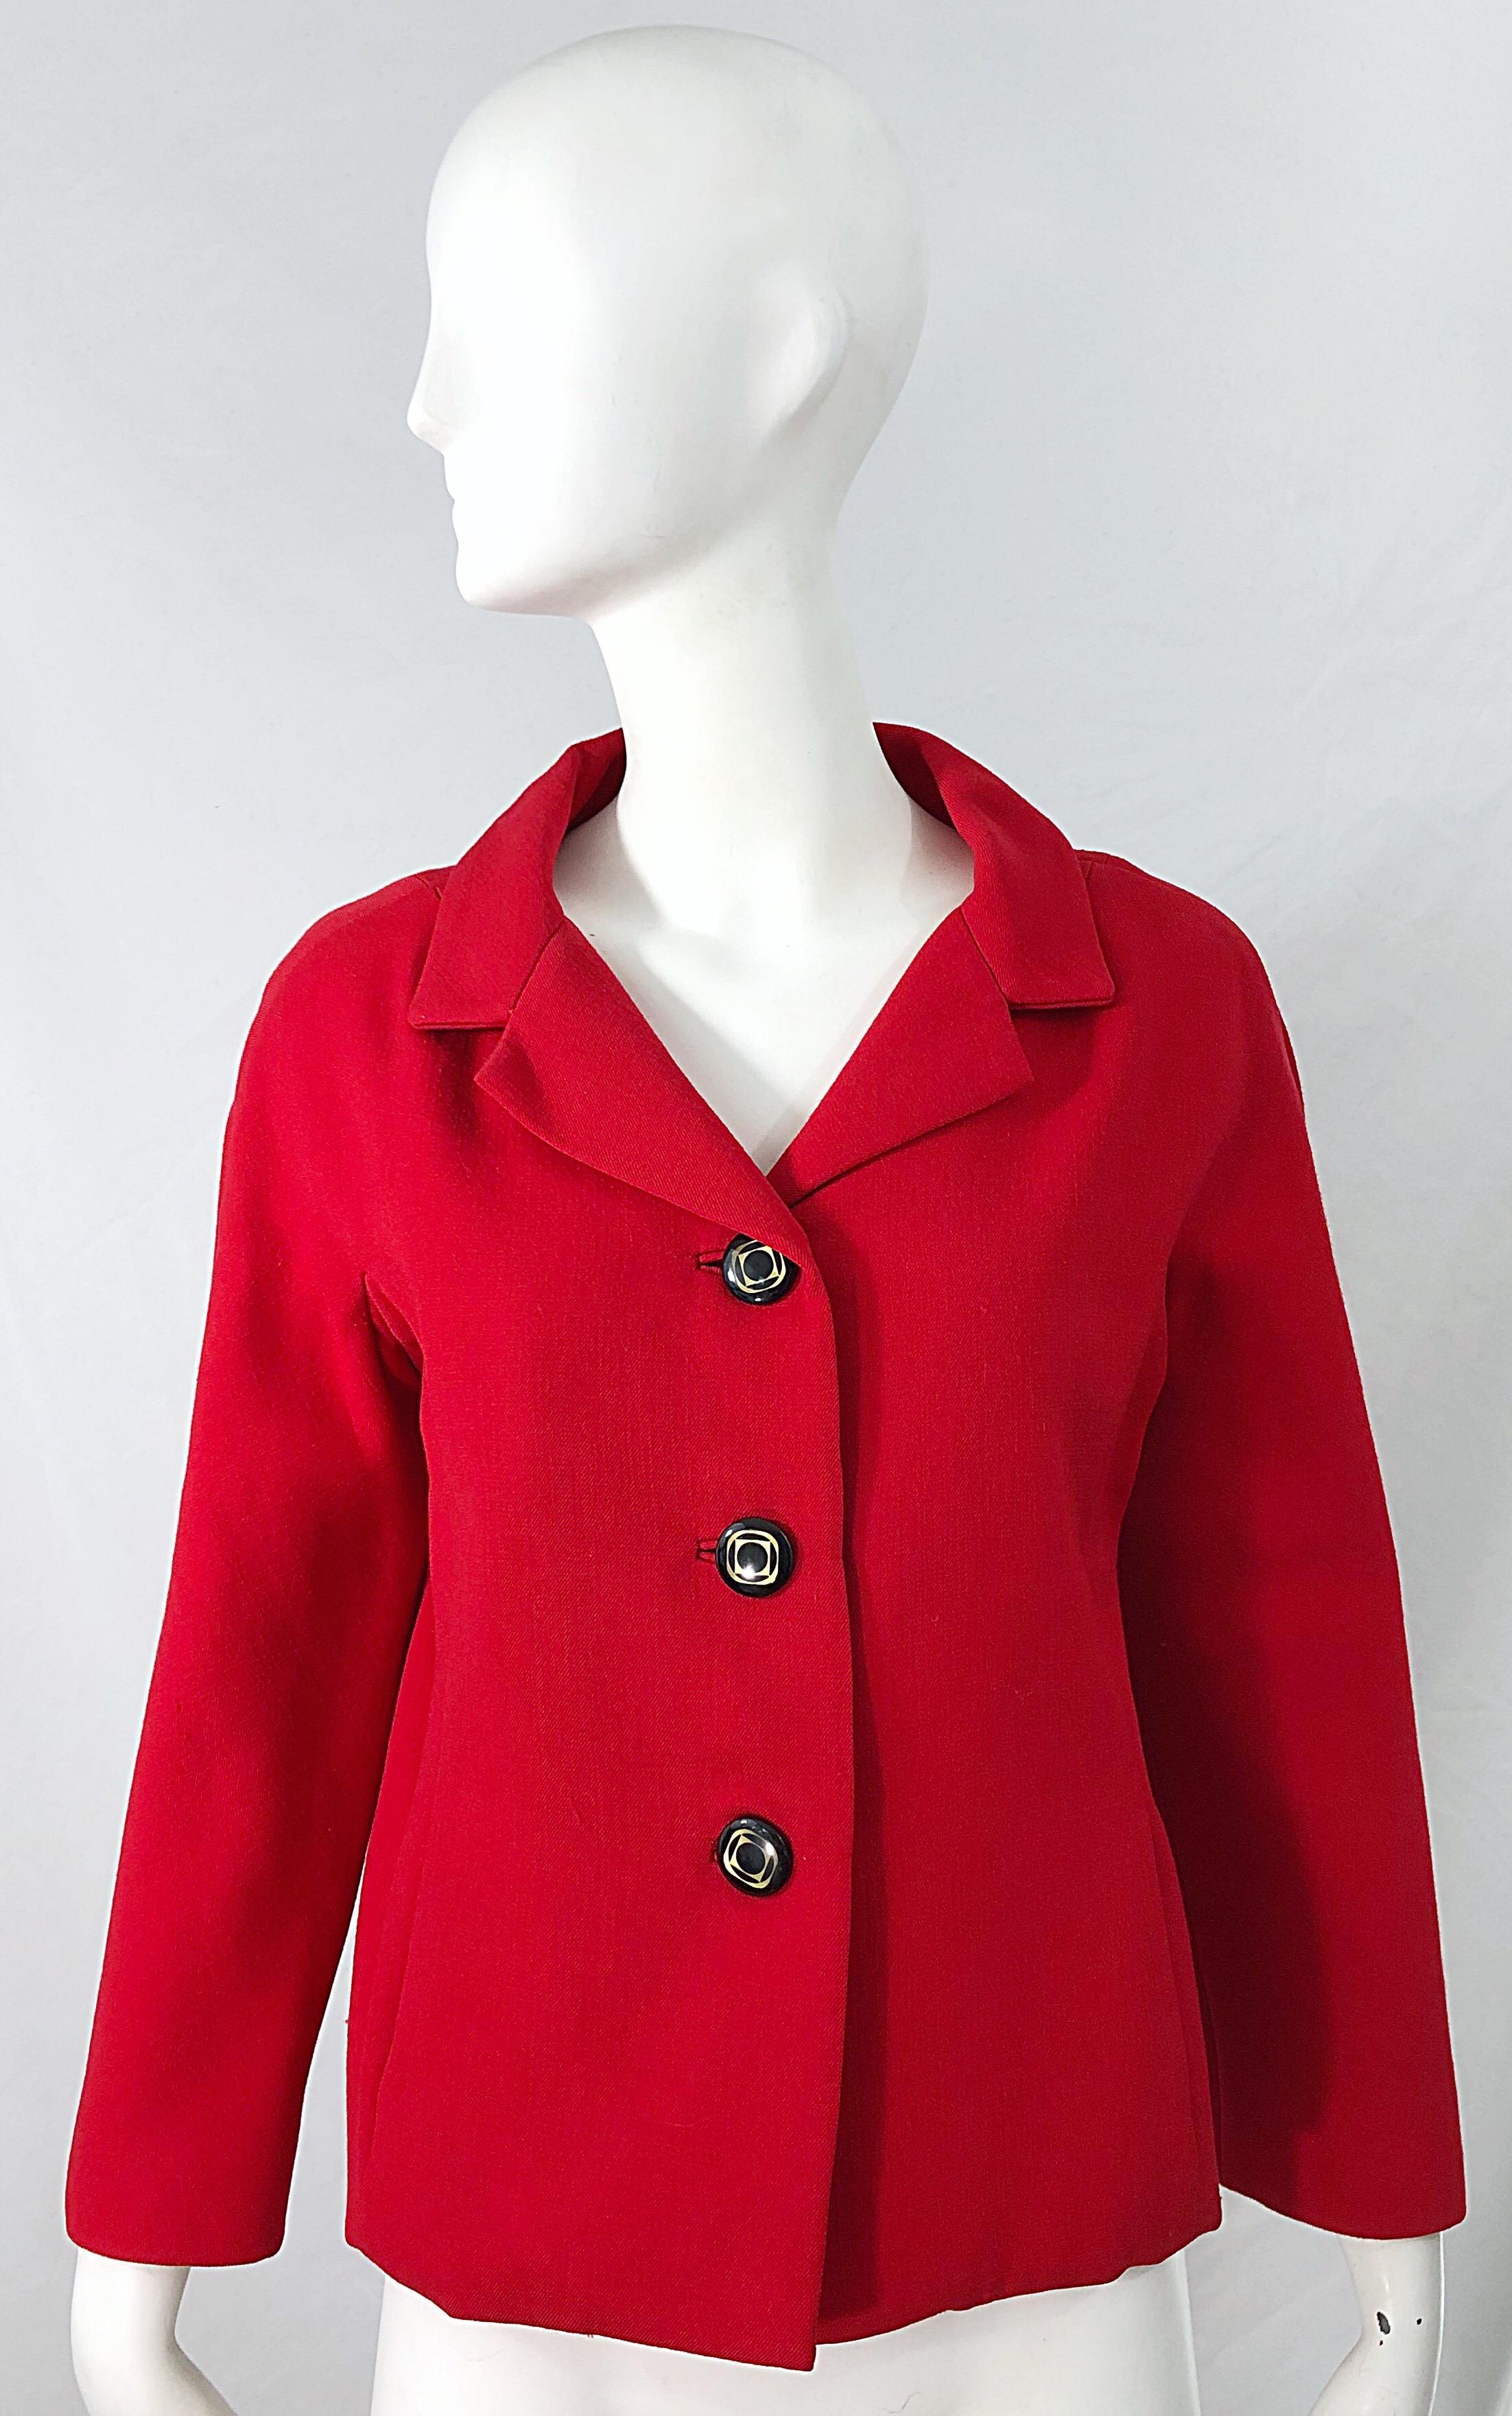 1960s Teal Traina Lipstick Red Mod Vintage Early 60s Wool Swing Jacket For Sale 9